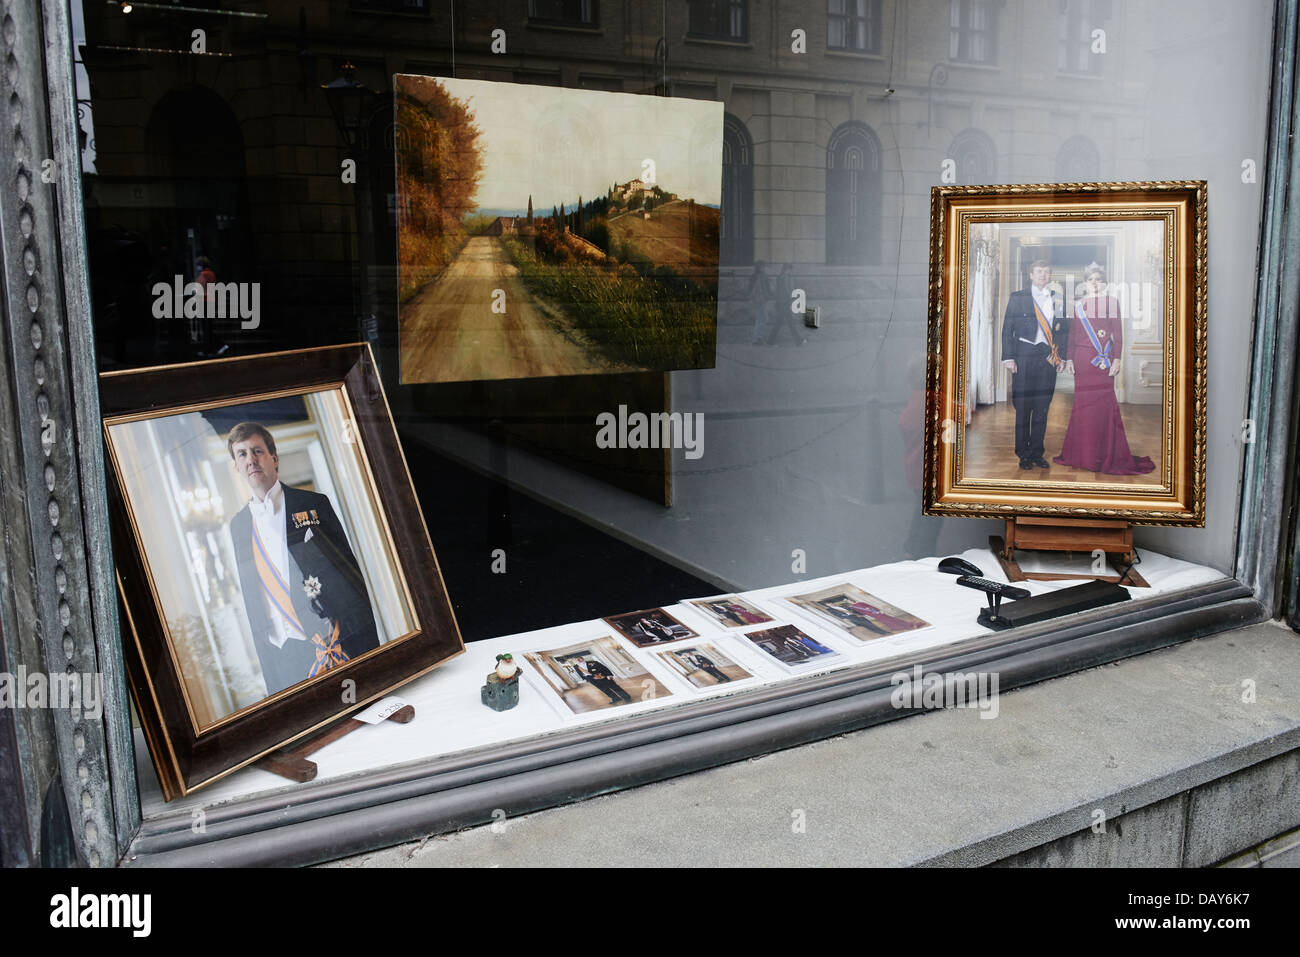 Historic shop with painting of kingdom family, The Hague, The Netherlands, Europe Stock Photo